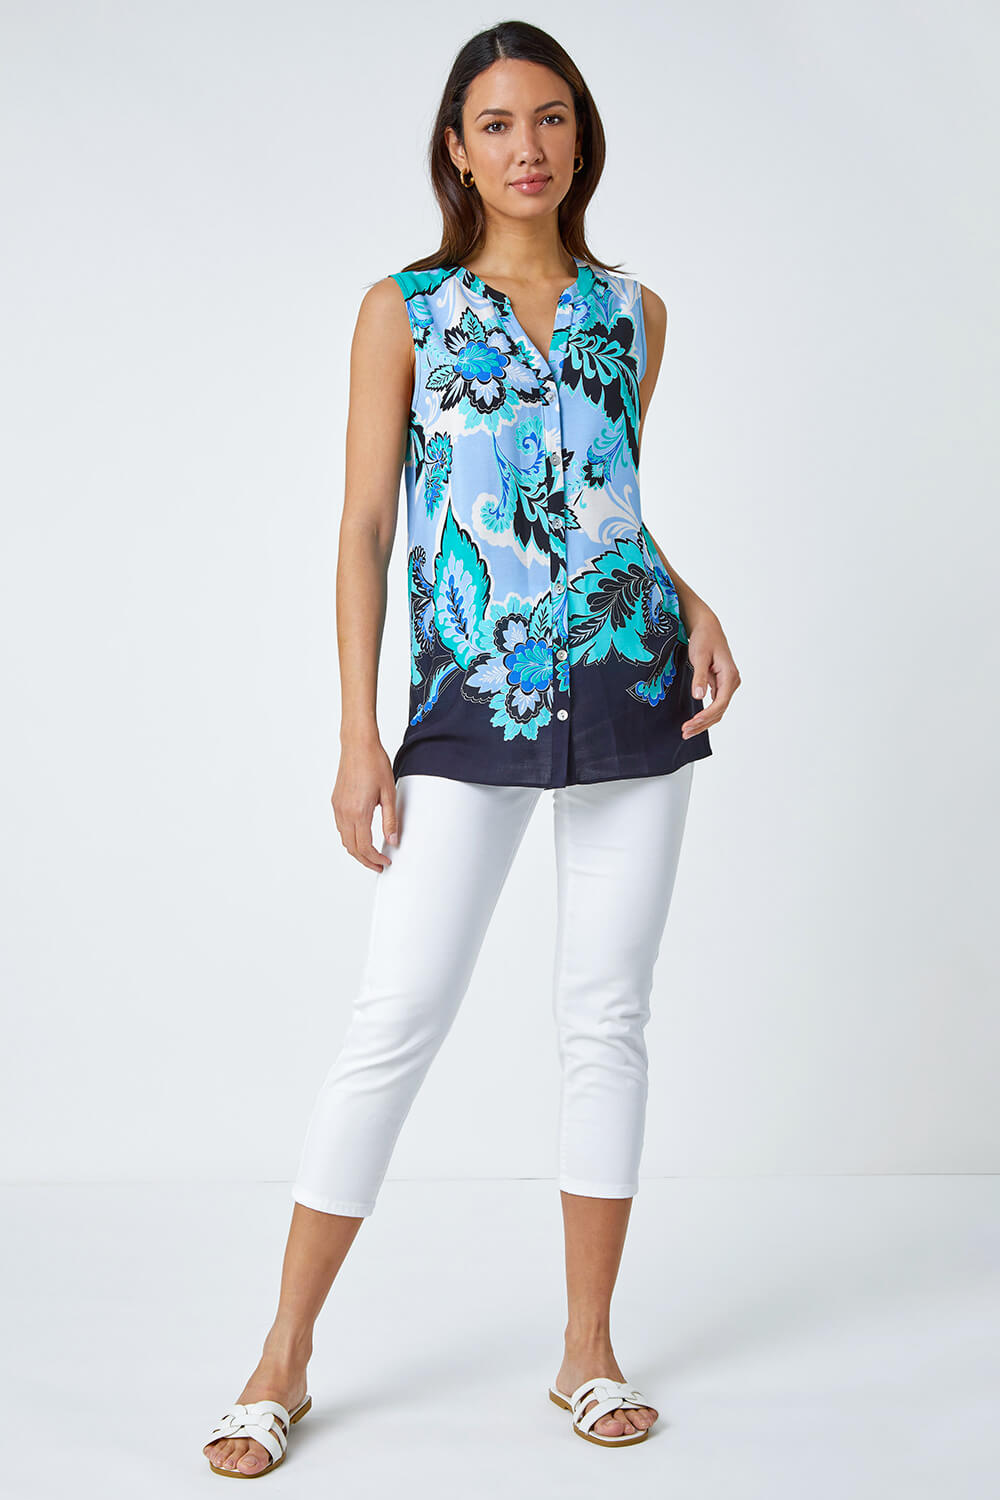 Blue Paisley Contrast Border Print Top, Image 2 of 5